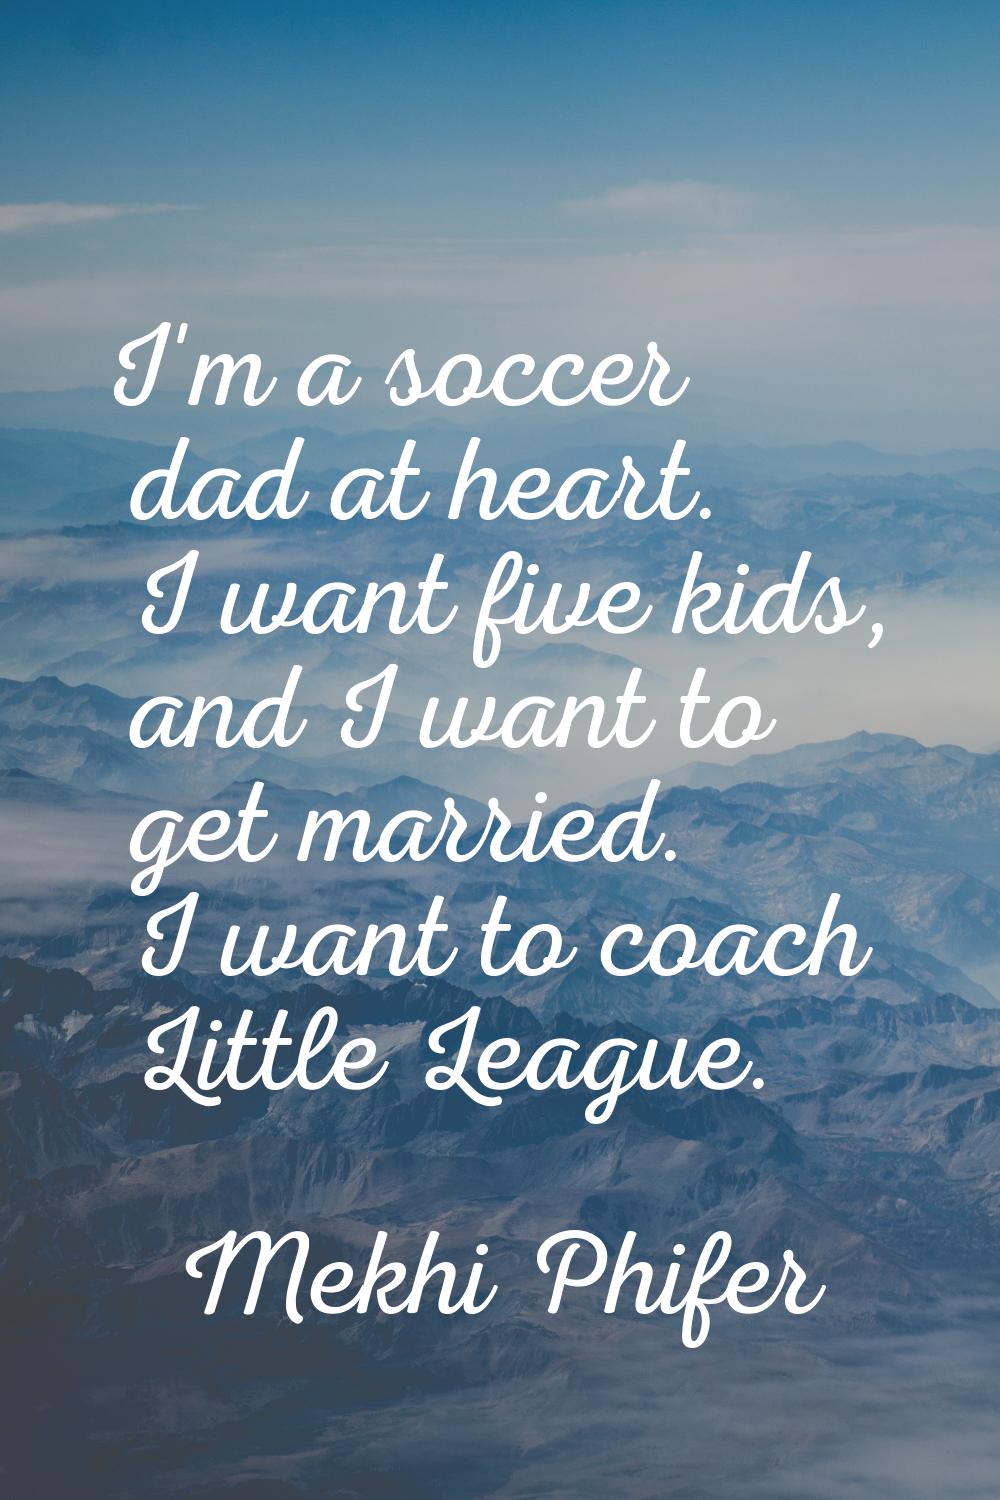 I'm a soccer dad at heart. I want five kids, and I want to get married. I want to coach Little Leag